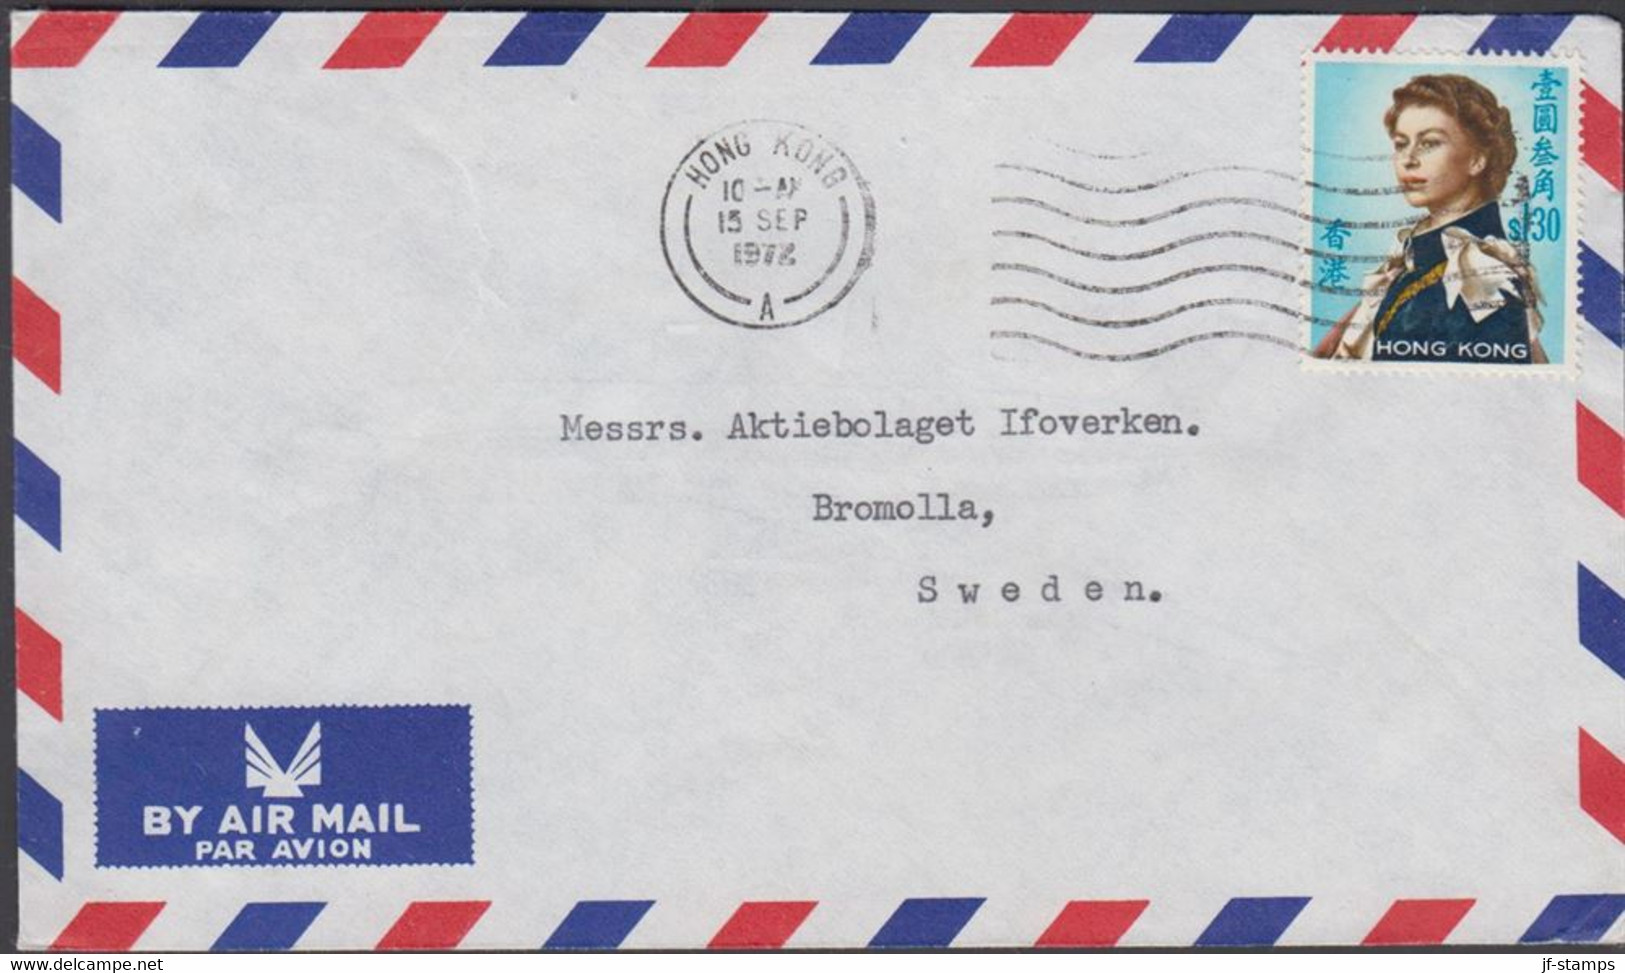 1972. HONG KONG. Elizabeth $ 1.30 On AIR MAIL Cover To Bromolla, Sweden From HONG KONG 15 SEP... (Michel 206) - JF427084 - Briefe U. Dokumente